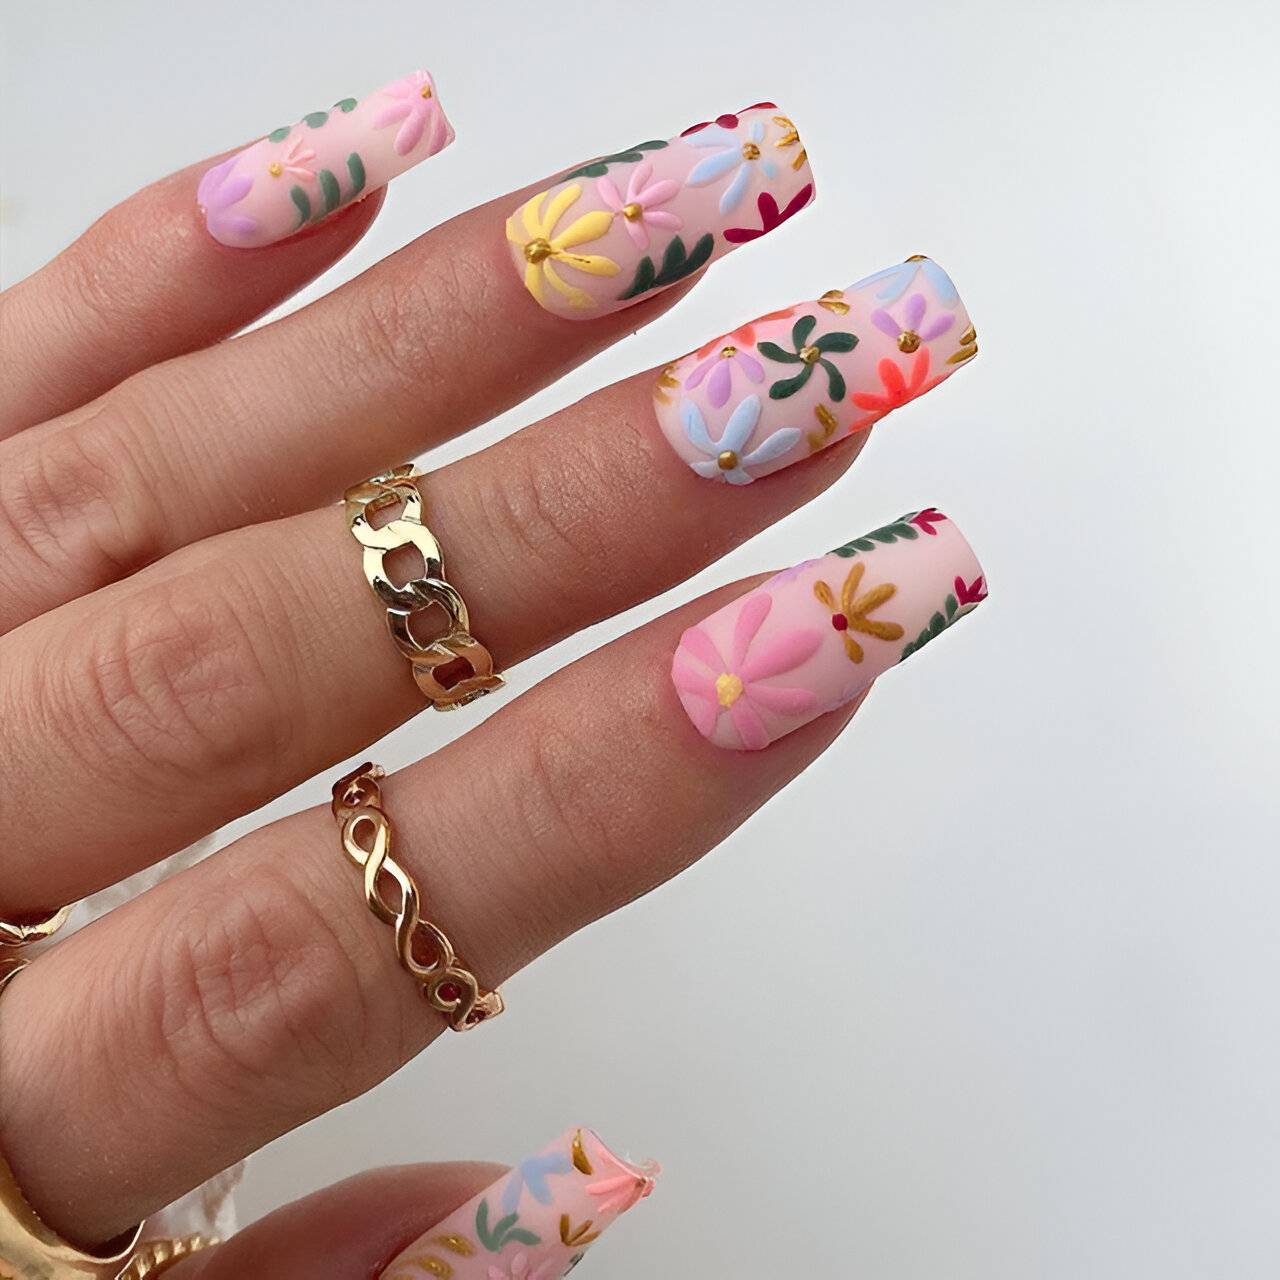 30 Gorgeous Flower Nail Designs No Pretty Girl Should Miss - 195